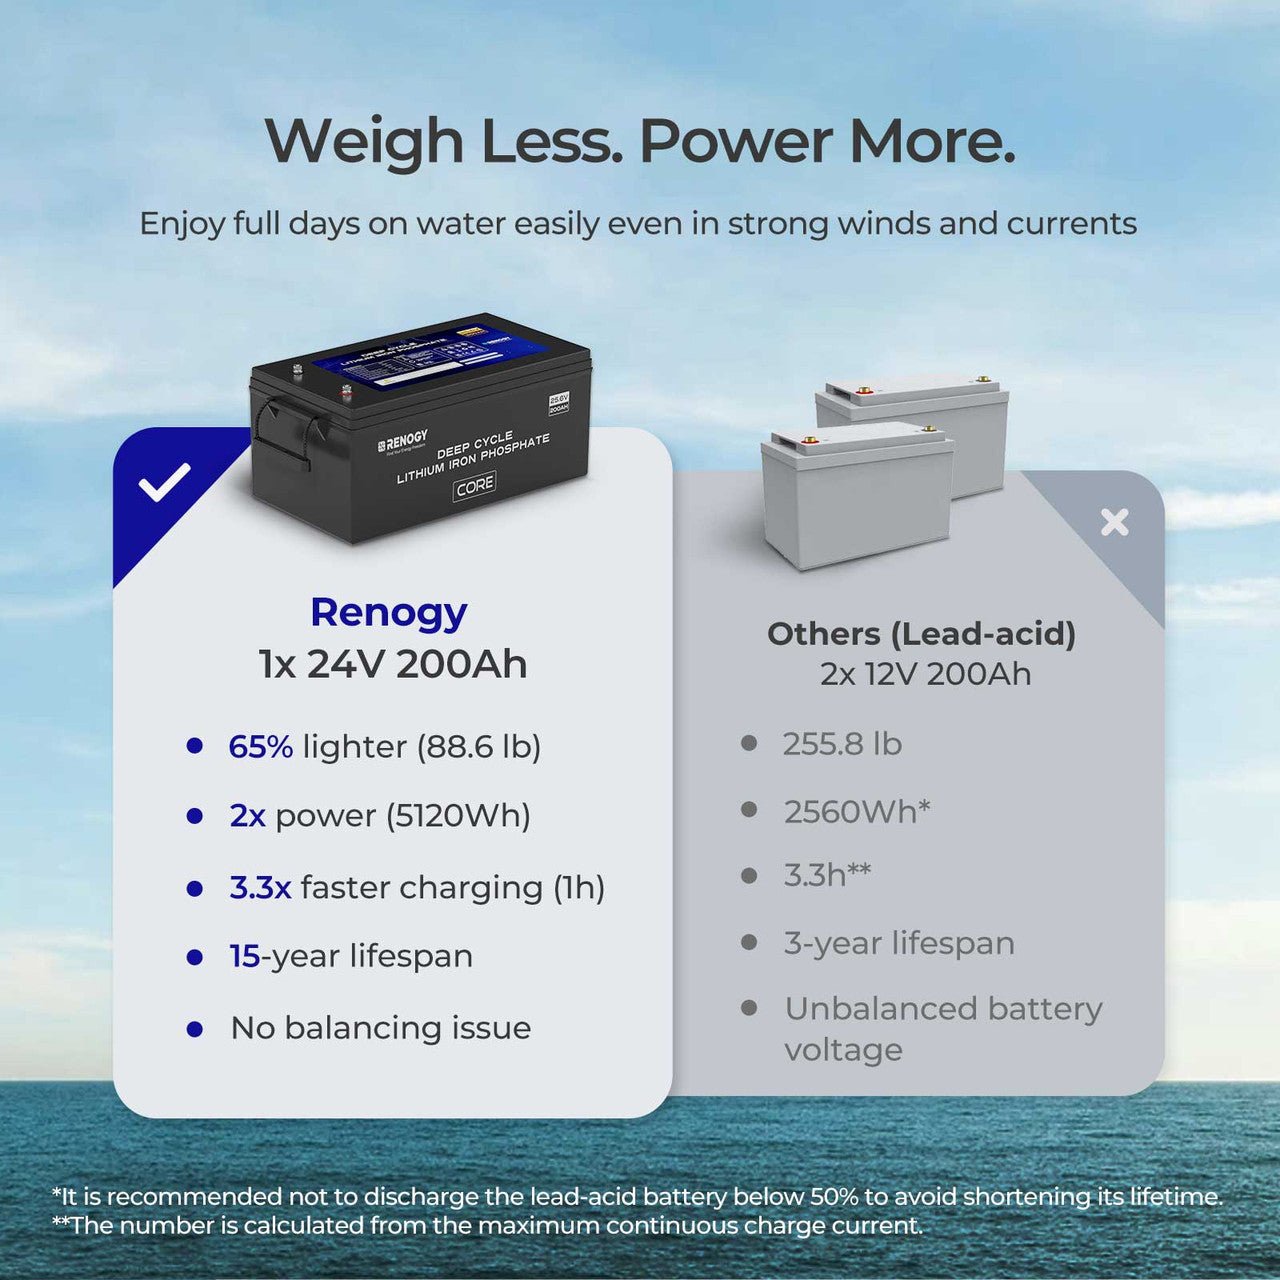 Renogy 24V 200Ah Core Series Deep Cycle Lithium Iron Phosphate Battery - Solar Generators and Power Stations Plus